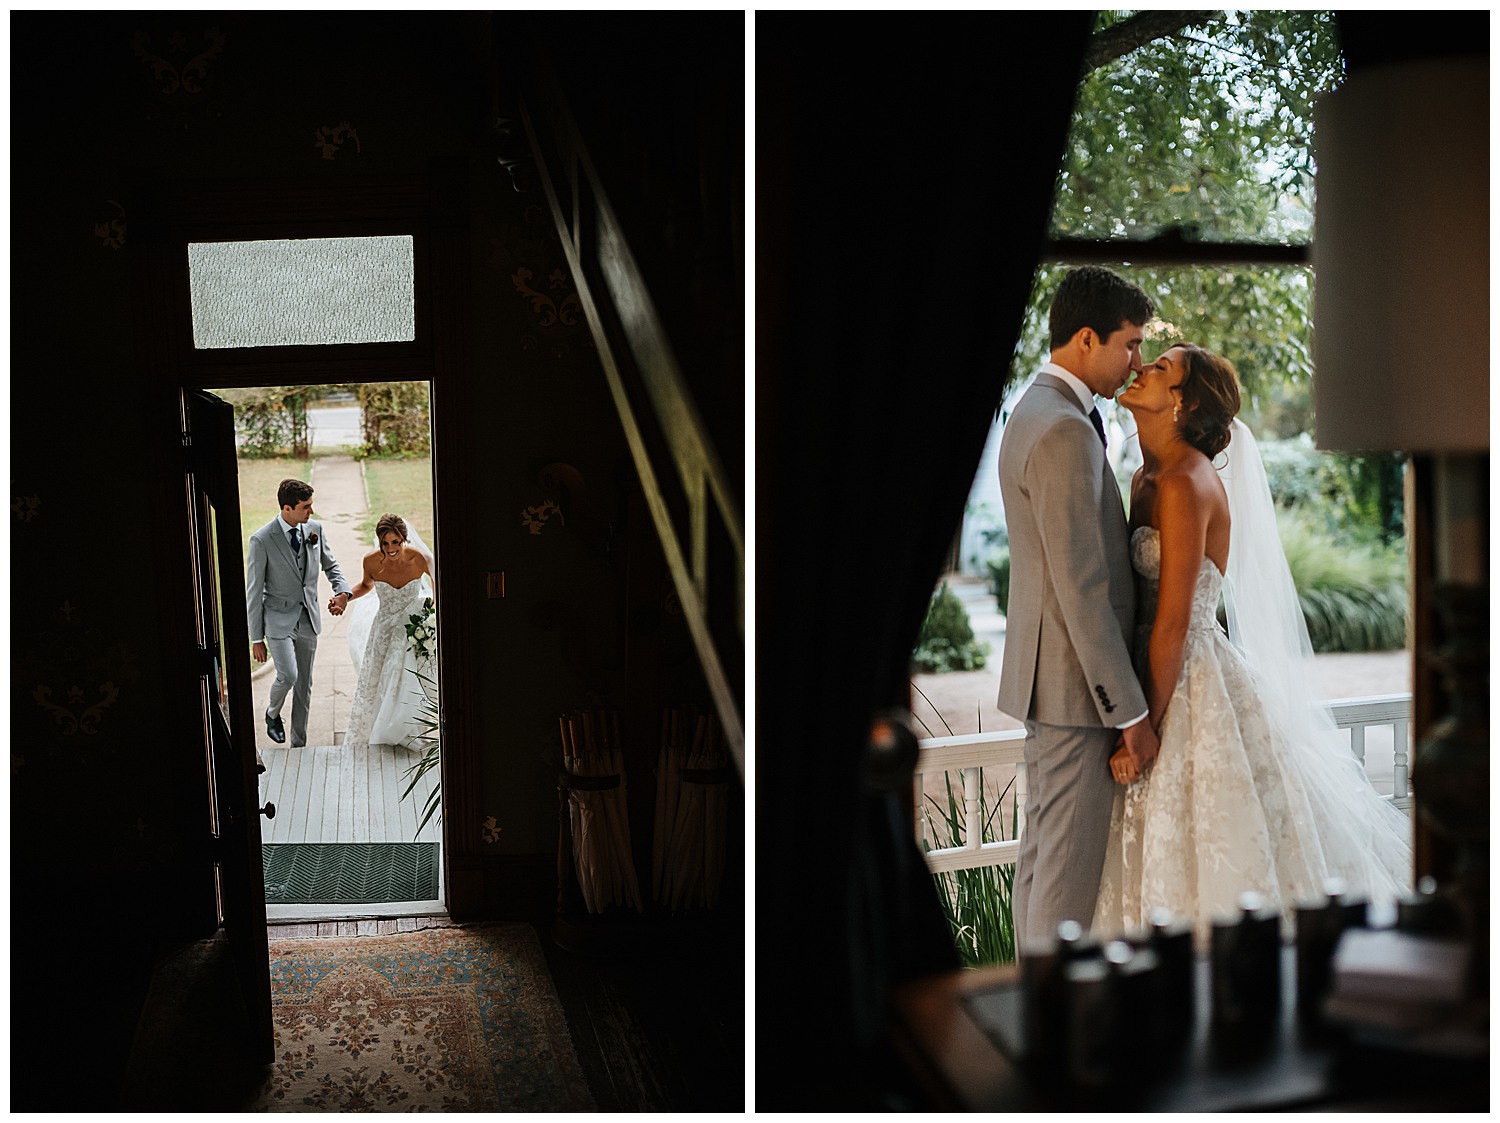 Newly married couple make their way up the steps at Barr Mansion, Texas